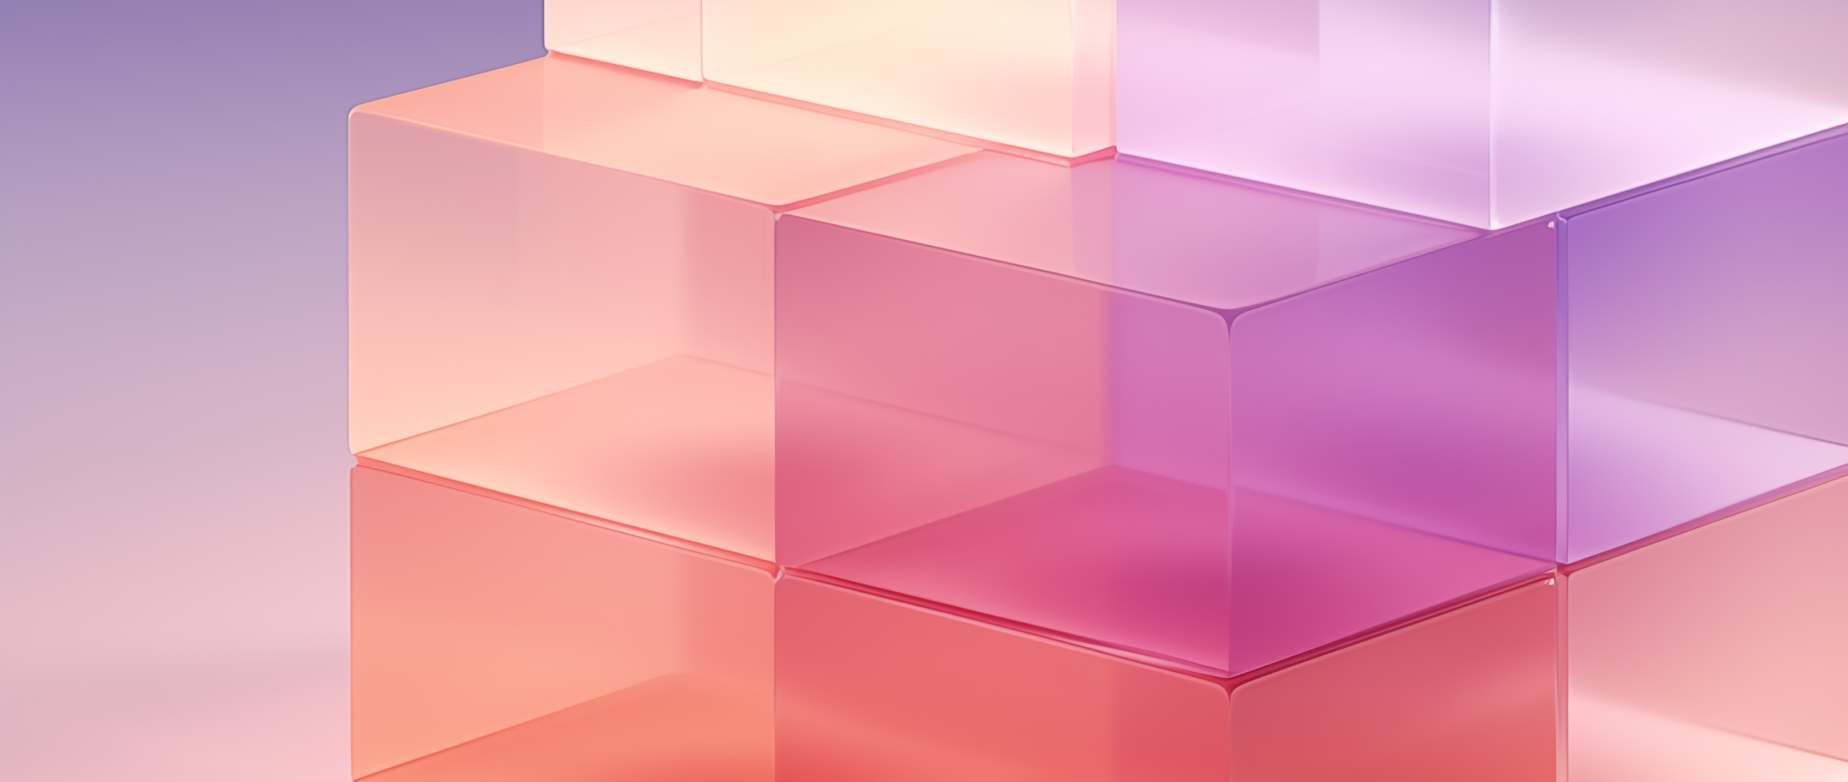 Translucent pink and purple boxes stacked against a gradient background